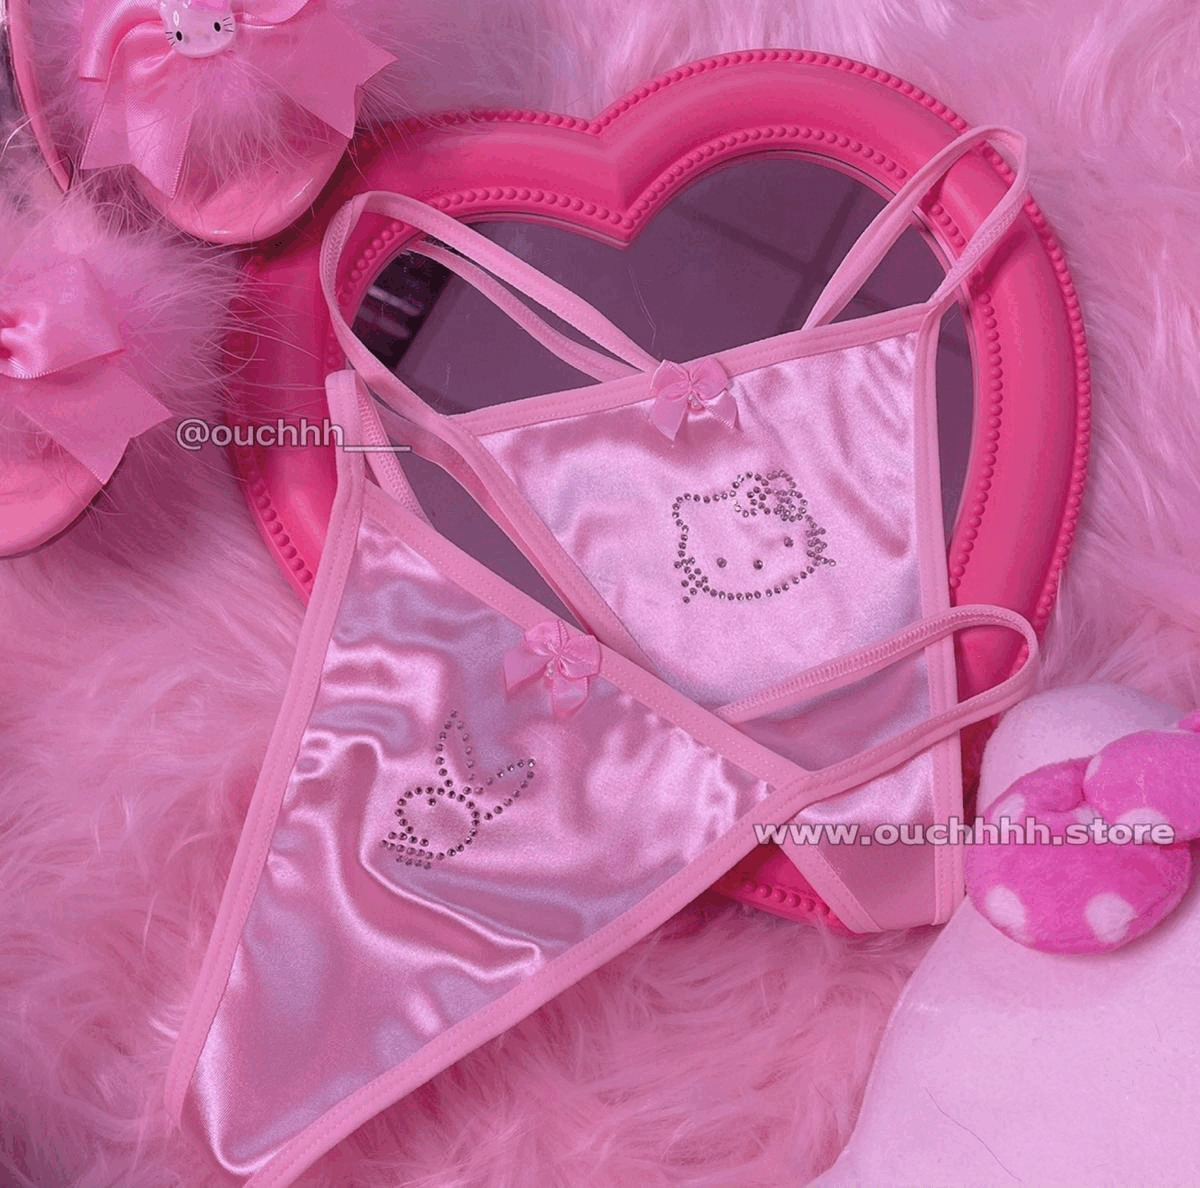 Icy Kitty/ Bunny G Strings